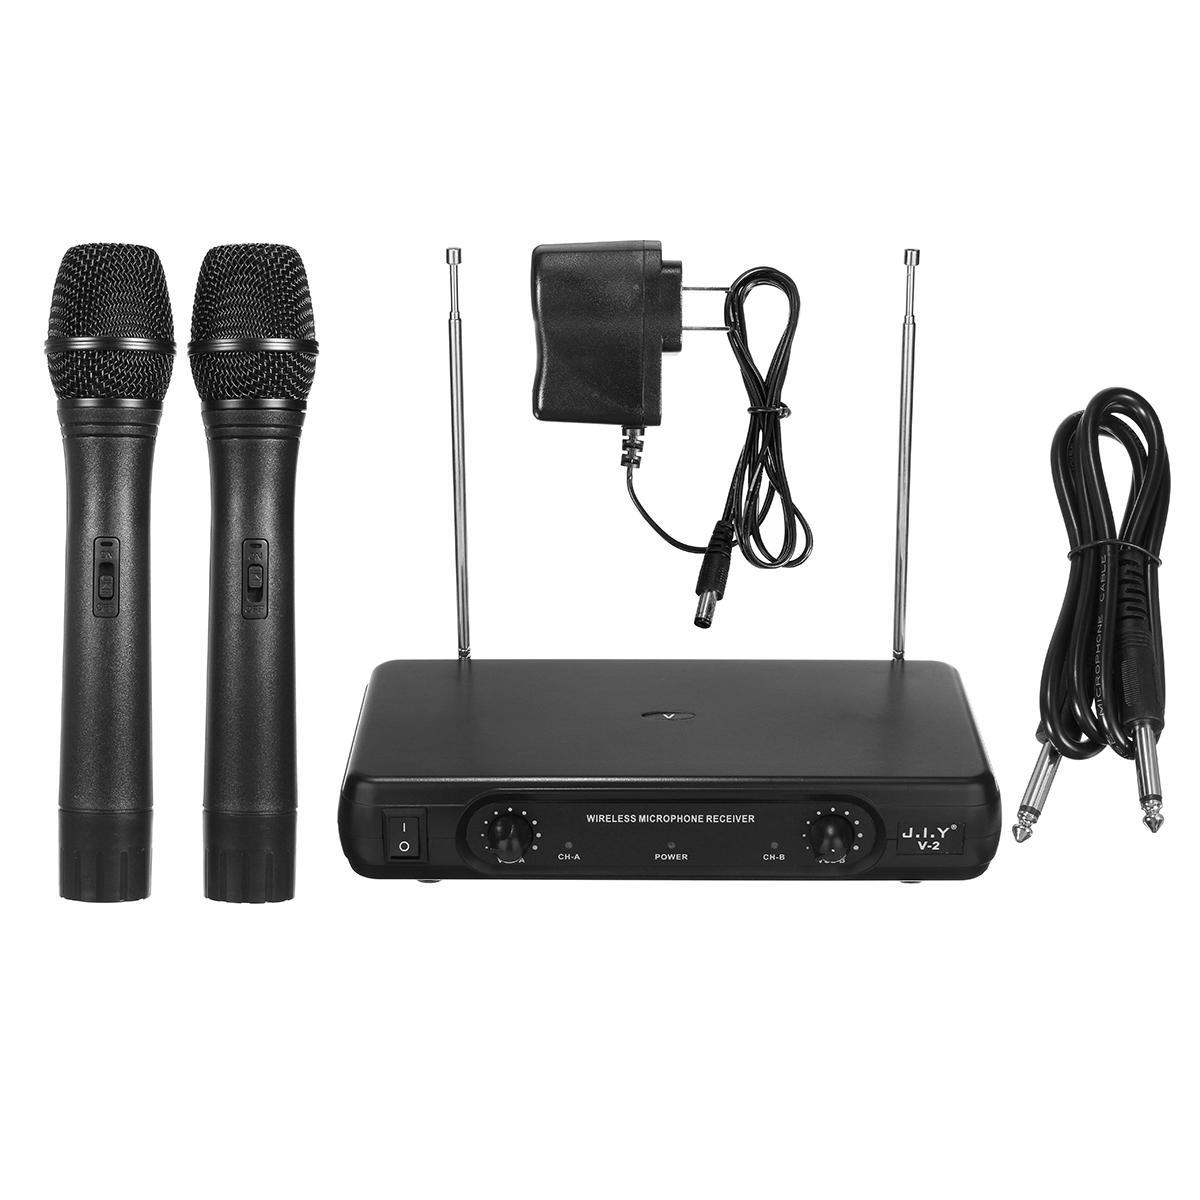 J.I.Y V-2 Wirelss Dual Microphone System for KTV Karaoke Speech Meeting Home Theatre System